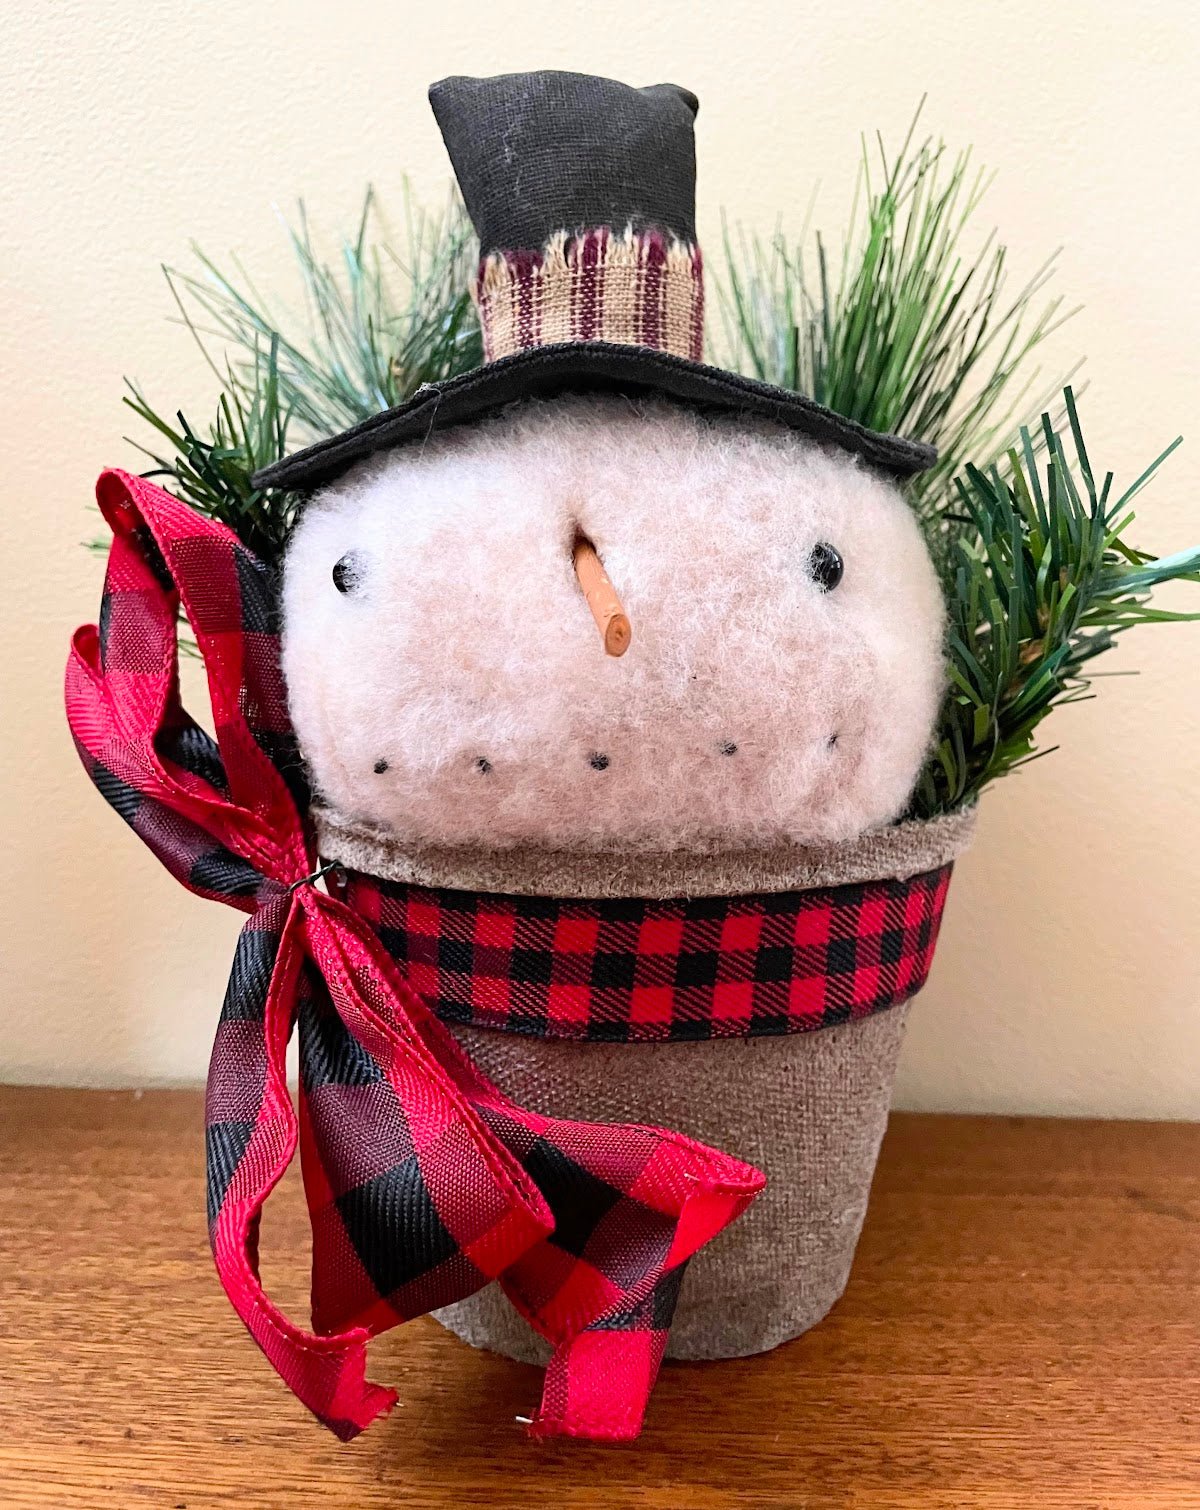 Primitive Folk Art Snowman Head in Pot of Christmas Greens 11&quot; Top Hat - The Primitive Pineapple Collection